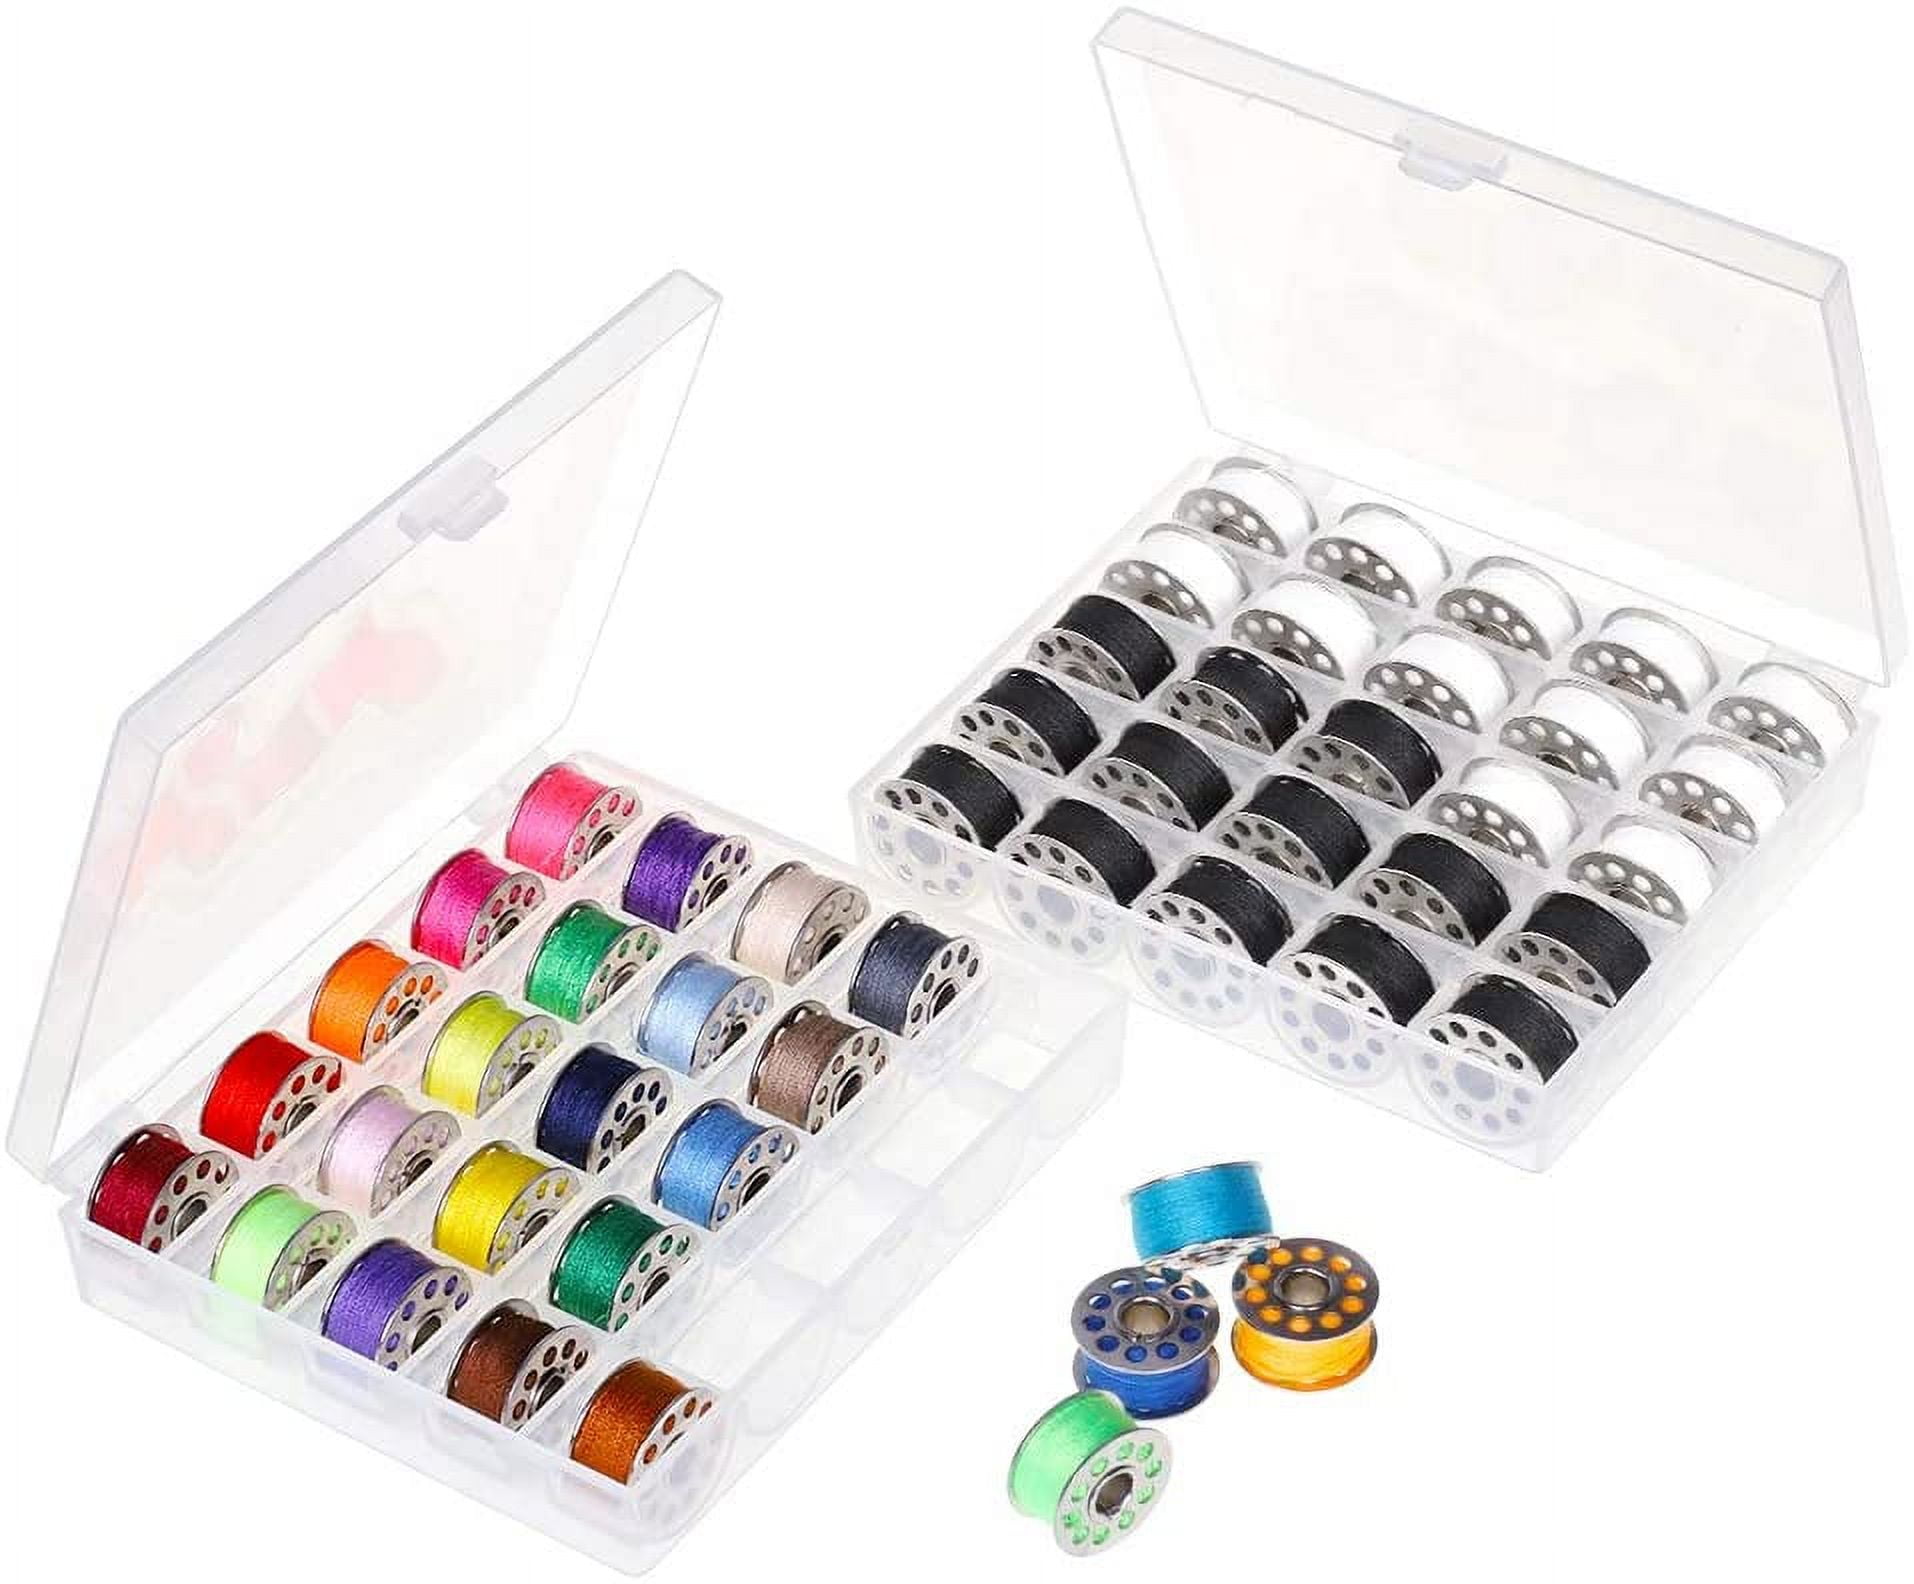  Sewing Machine Tools 36/39/64pcs Bobbins and 40M Sewing  Machine Thread Bobbin Holder Case Sewing Tools Home Sewing Machine Kit for  Adults (Color: 39 colors) : Hobbies